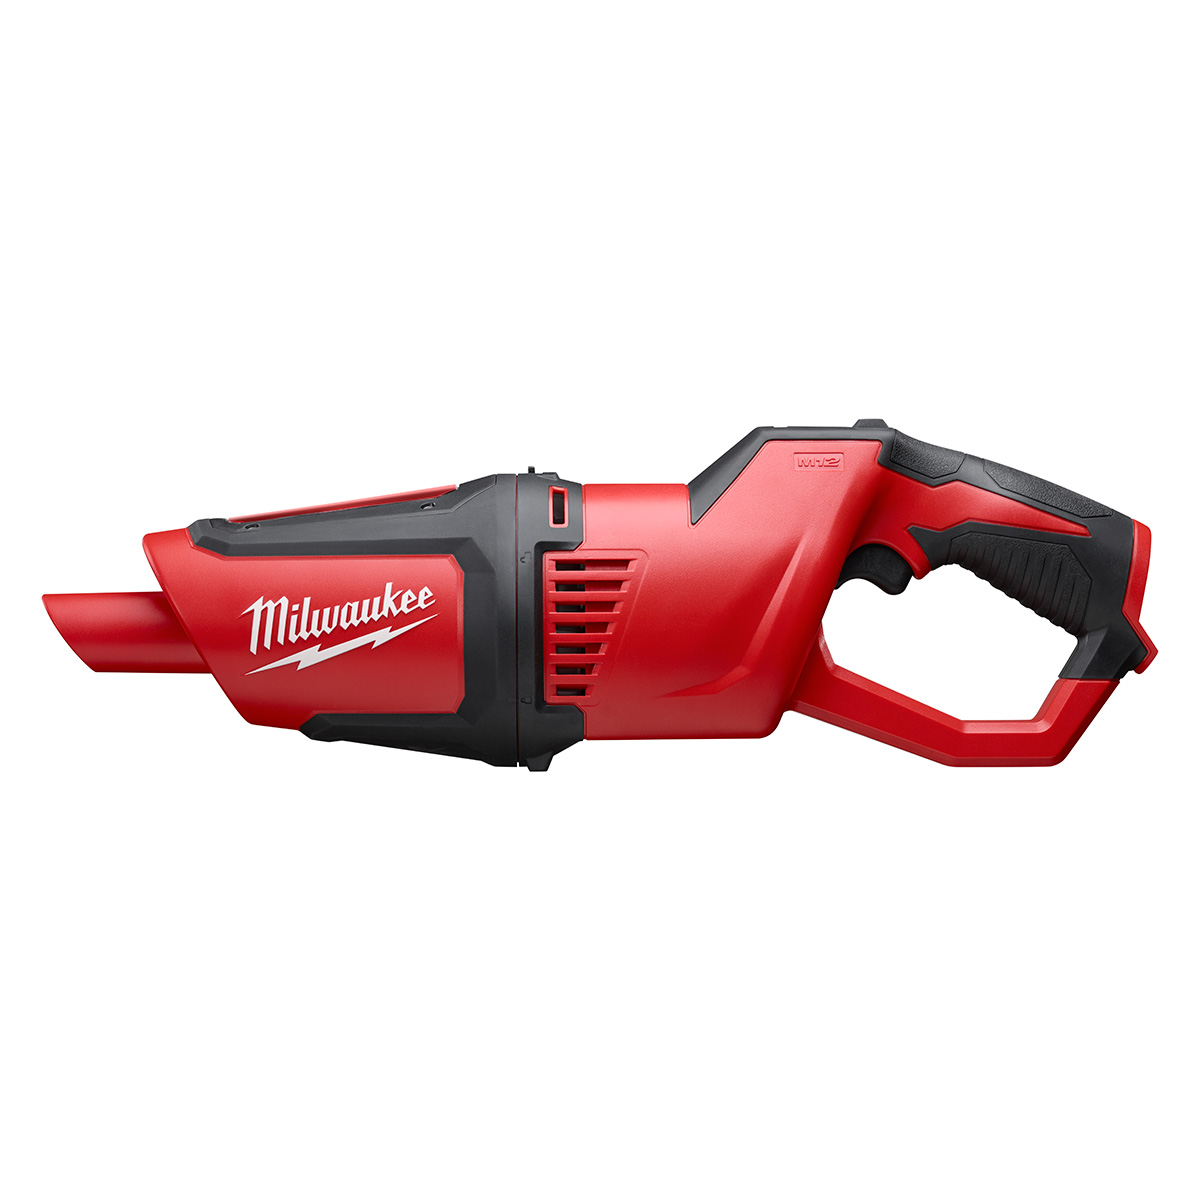 M12 12 Volt Lithium Ion Compact Vacuum - Tool Only